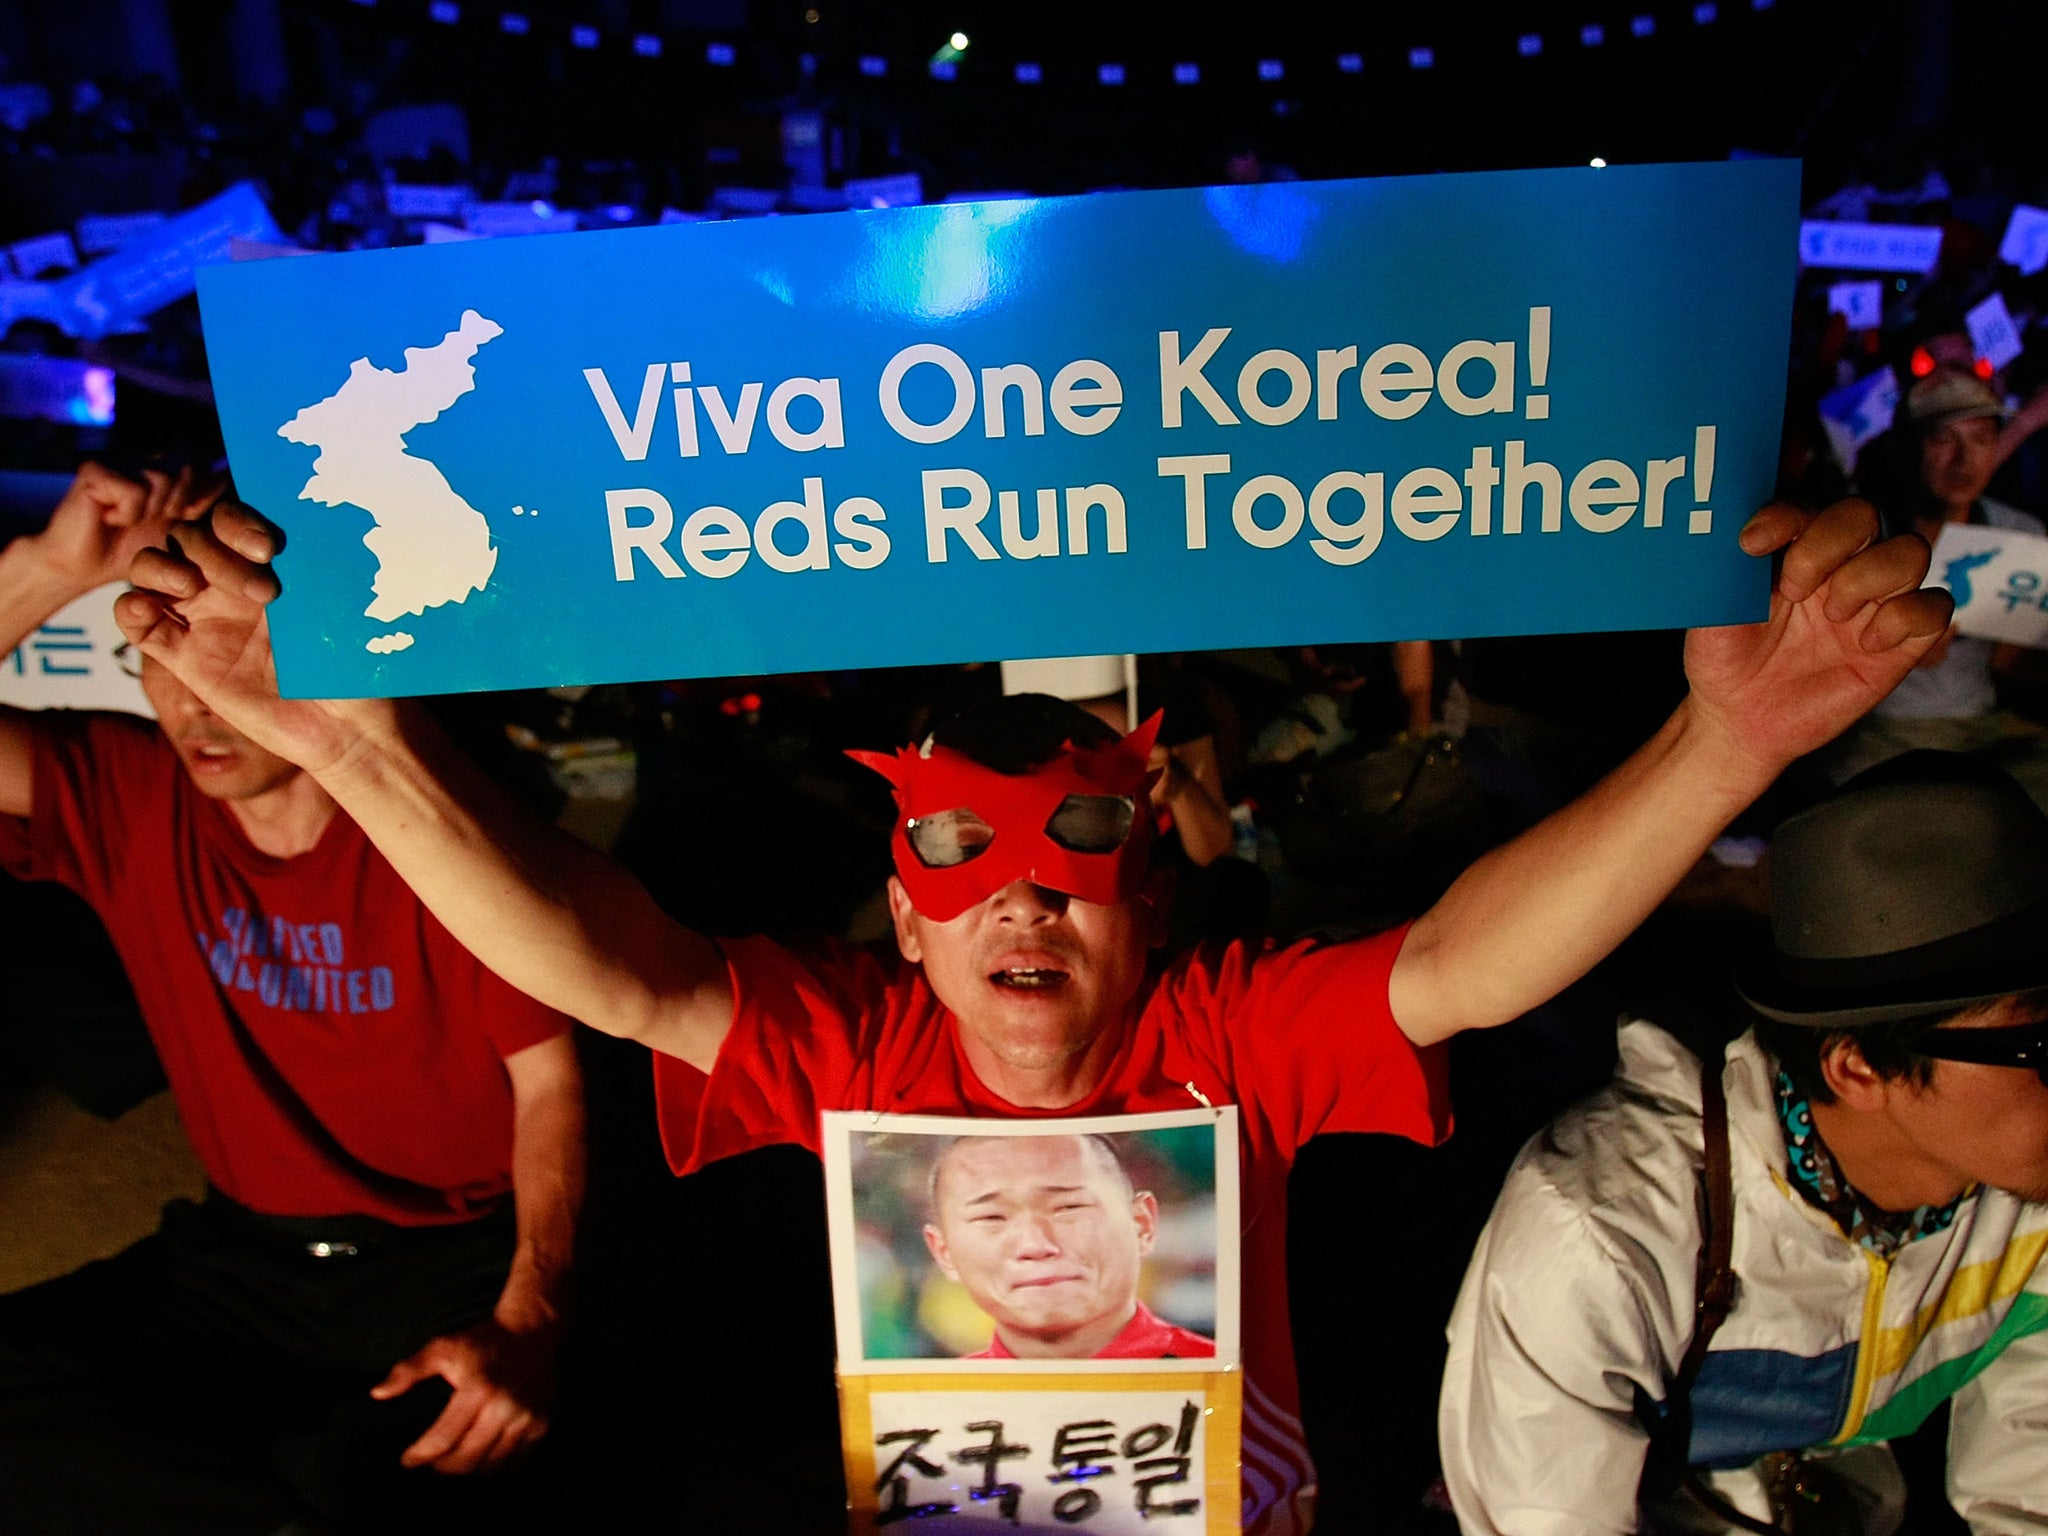 South Koreans wave unification flags as they cheer on the North Korean team in a game at the 2010 football world cup